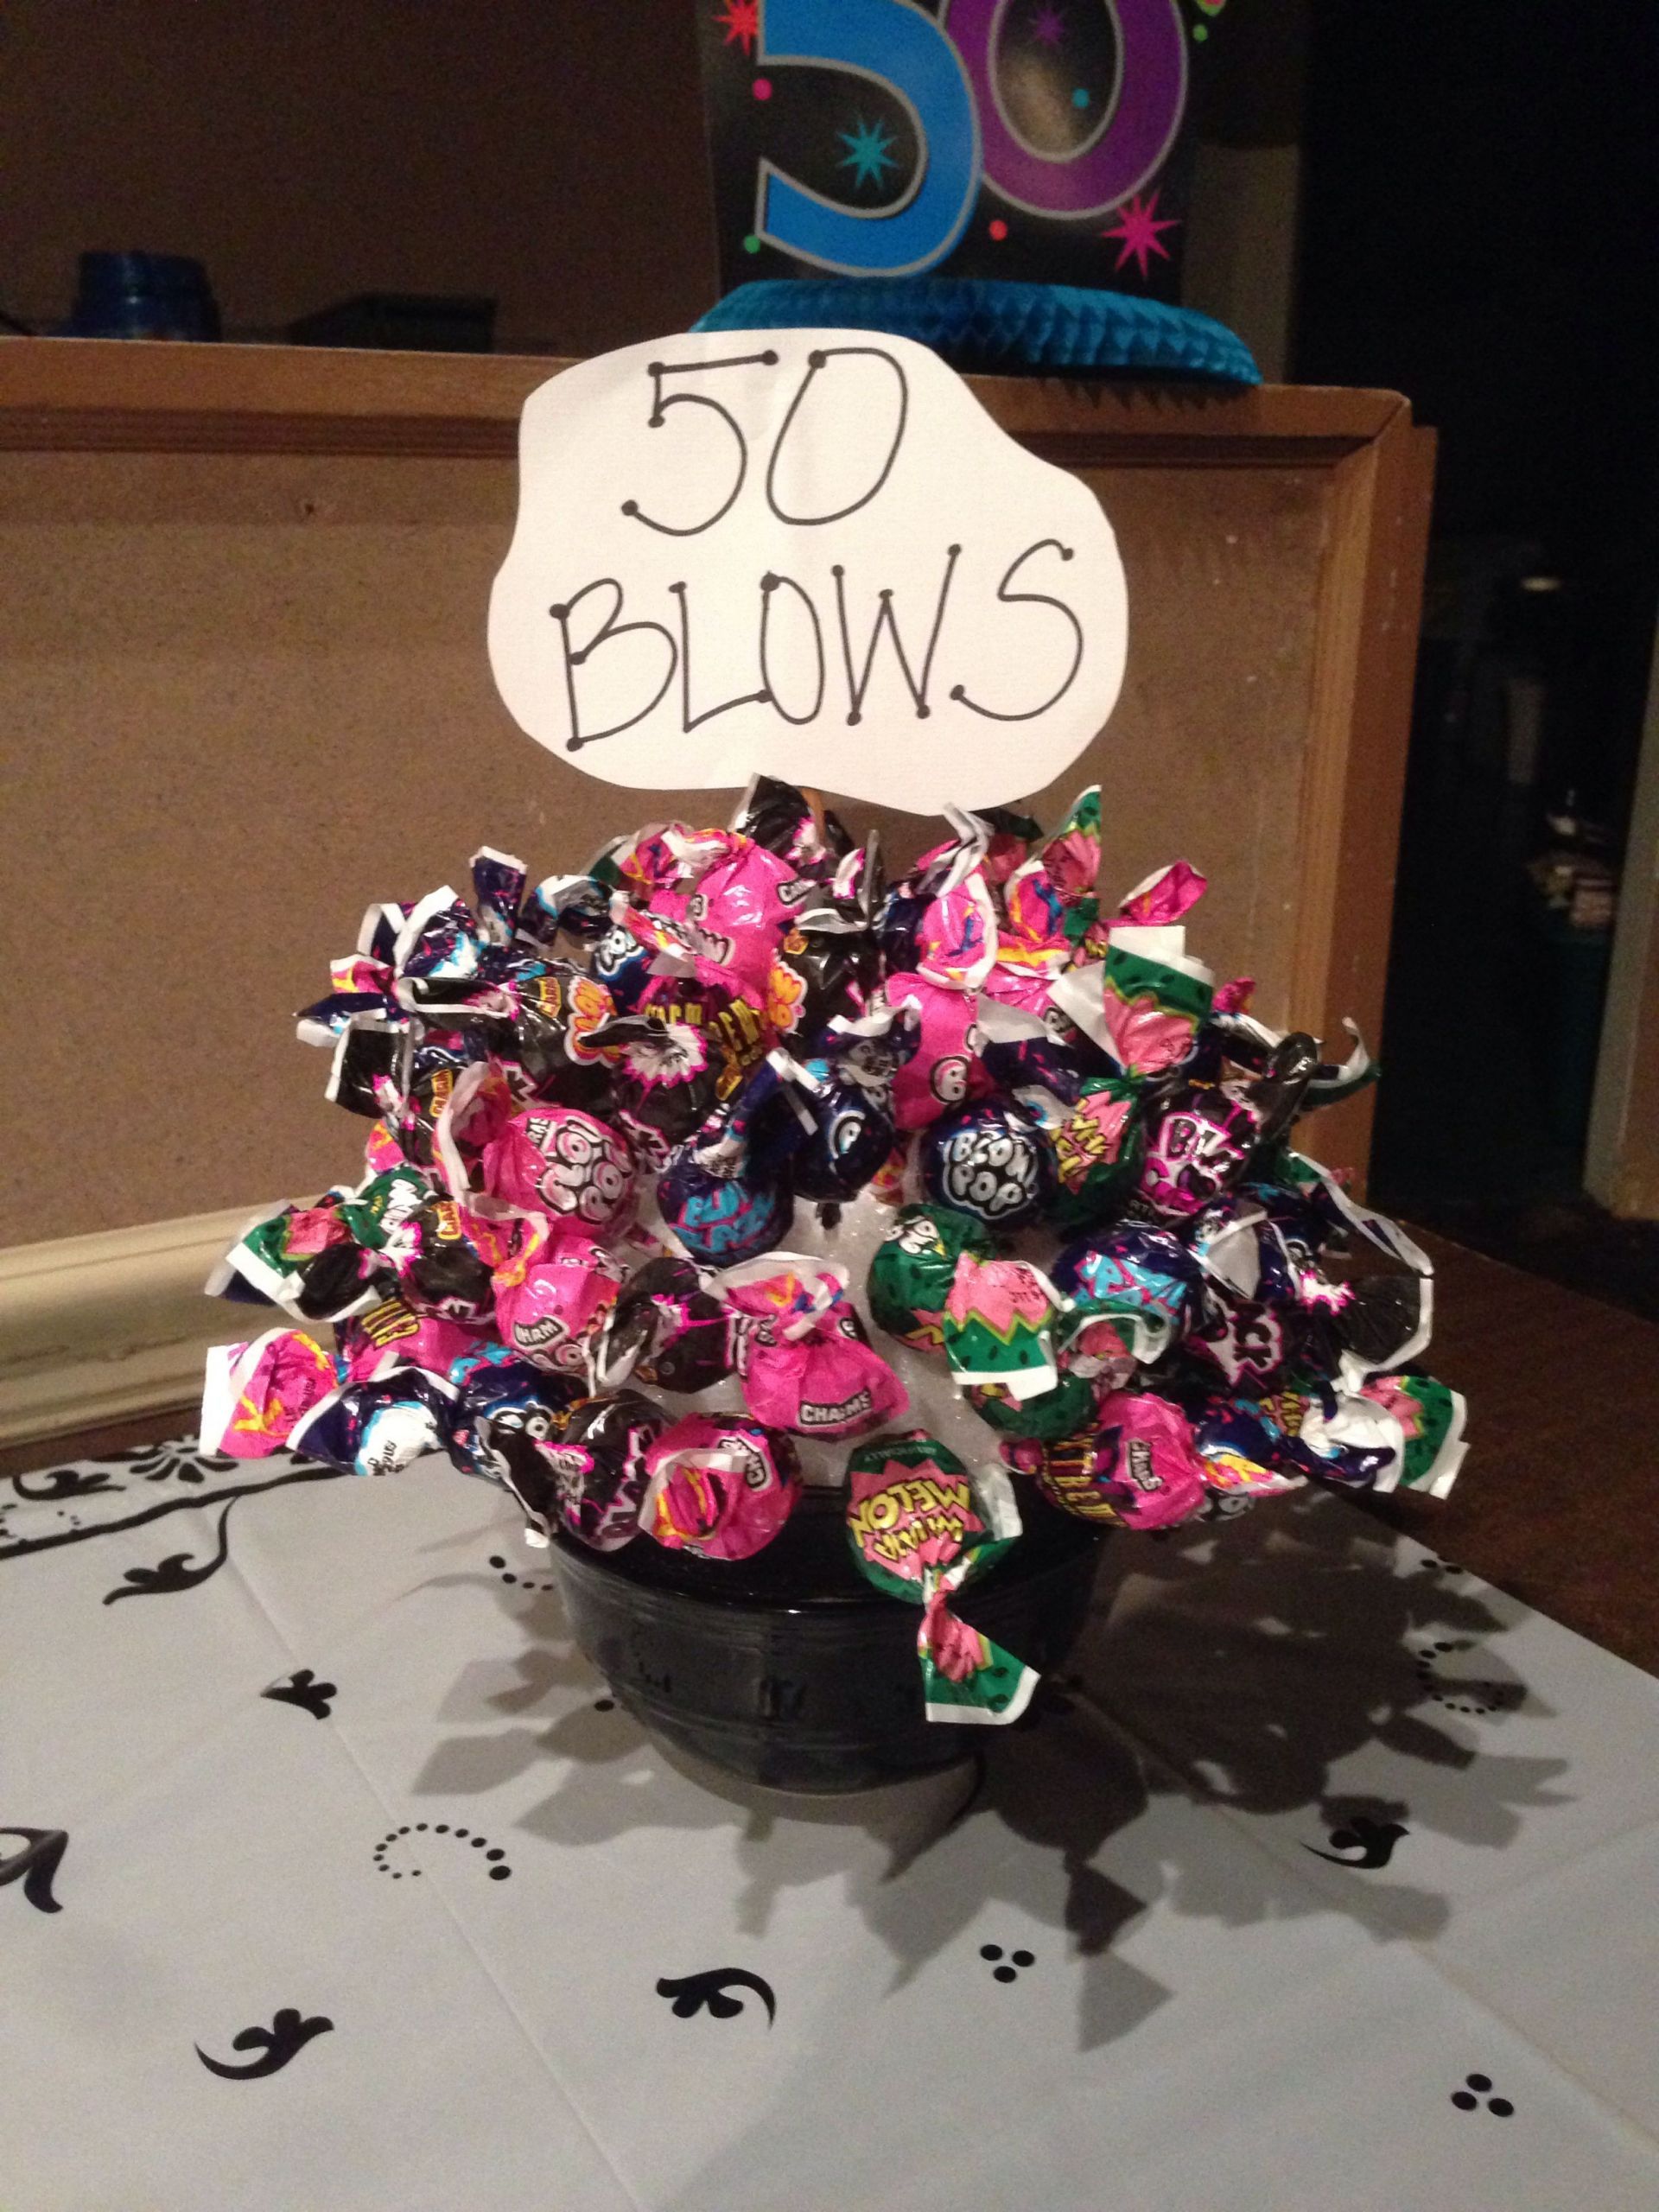 Fifty Birthday Gift Ideas
 50 Blows bouquet for a 50th birthday party t